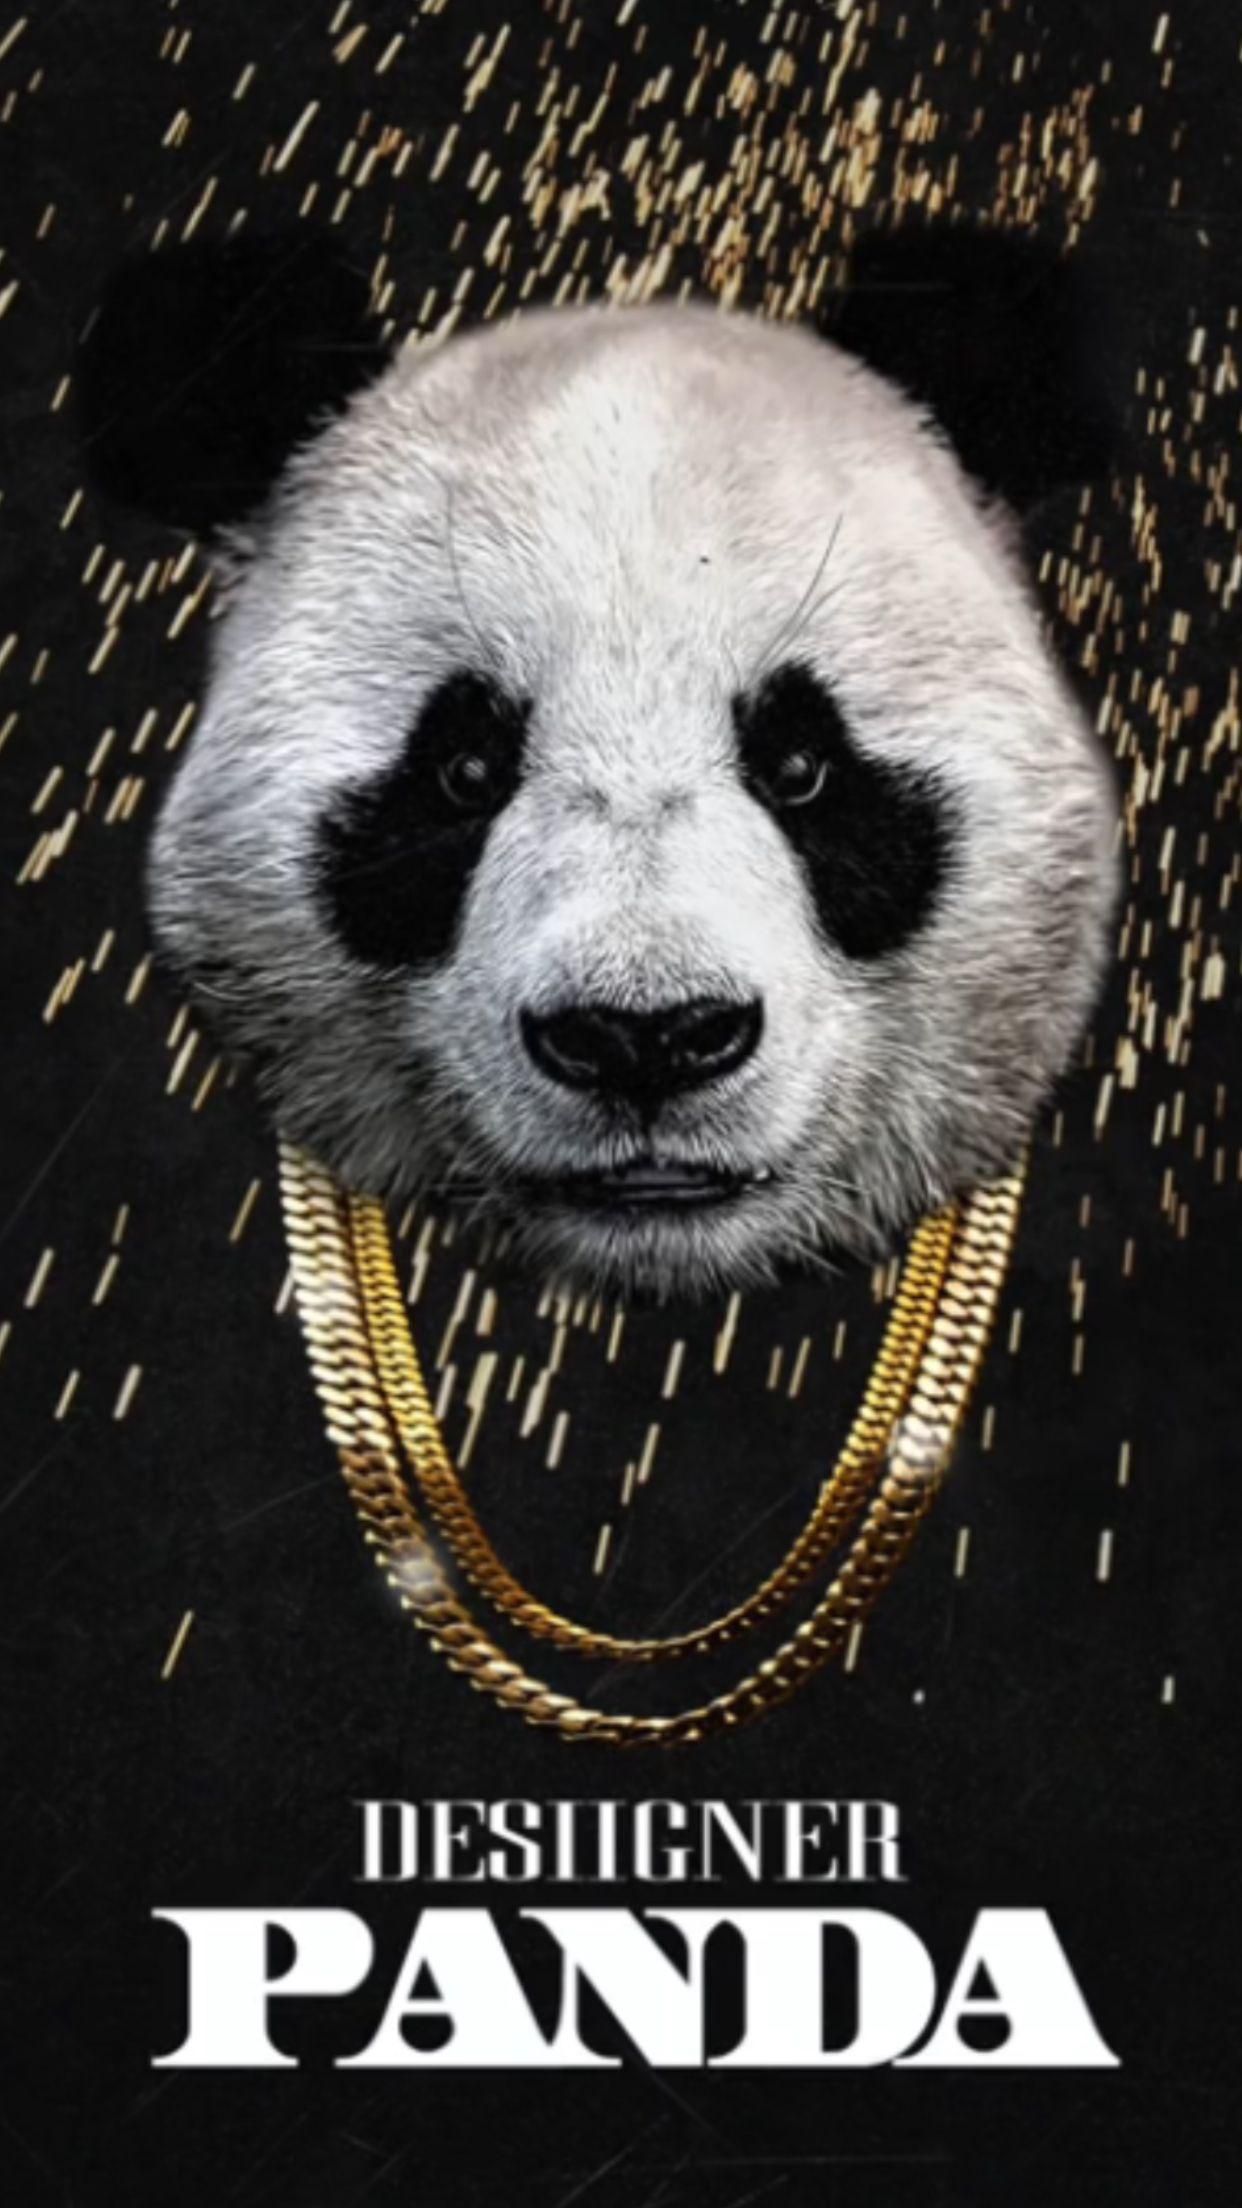 Hey, a panda wrapped in gold chains is standard gangster